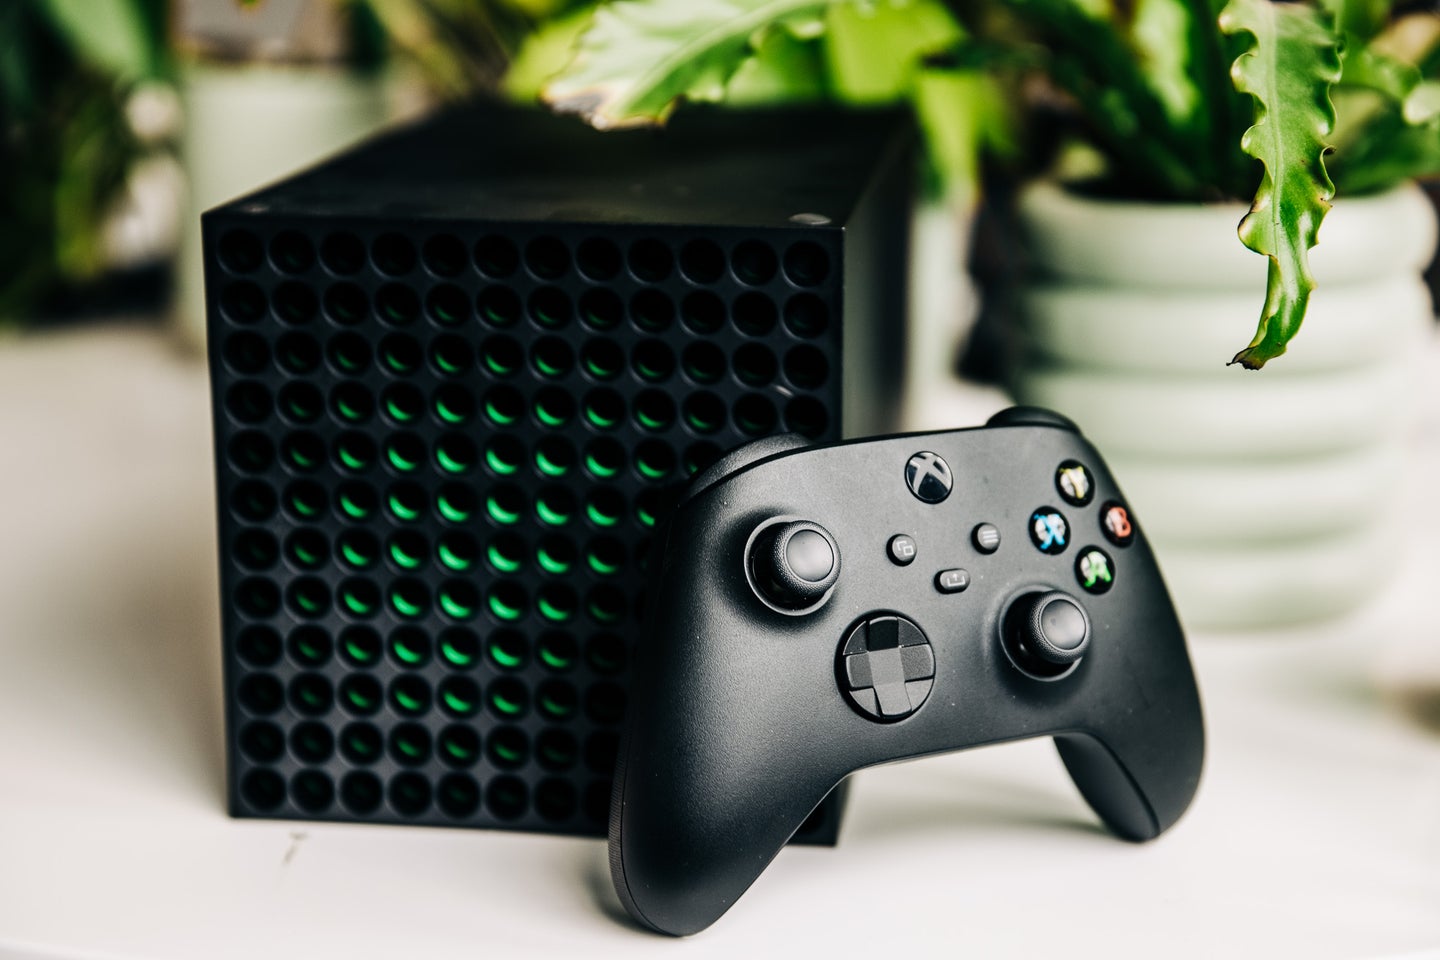 The Xbox Series X offers killer gaming—if your TV can handle it